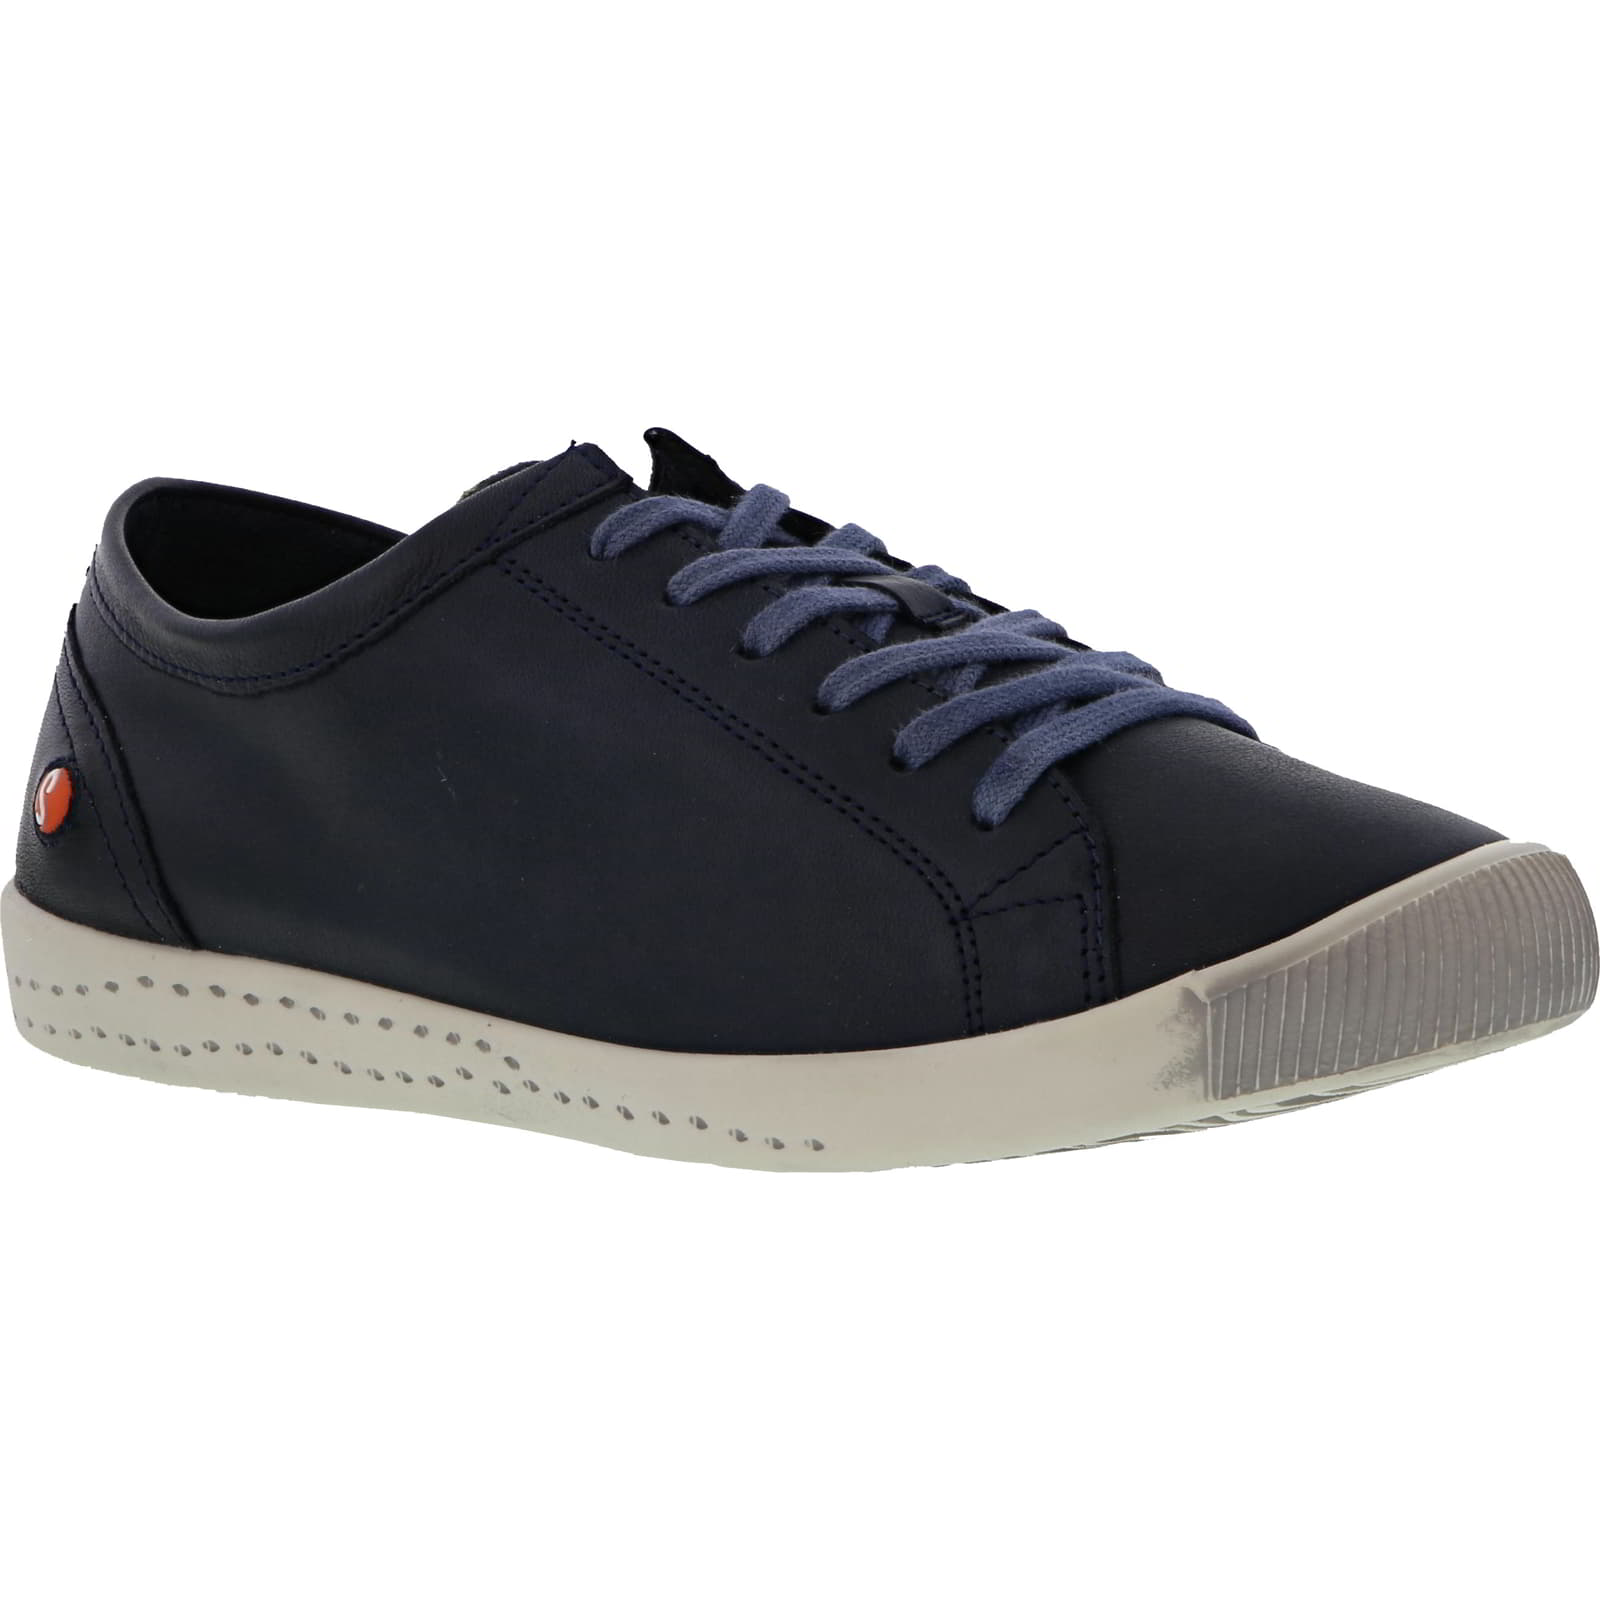 Softinos By Fly London Women's Isla Leather Trainers - Washed Navy - UK 4